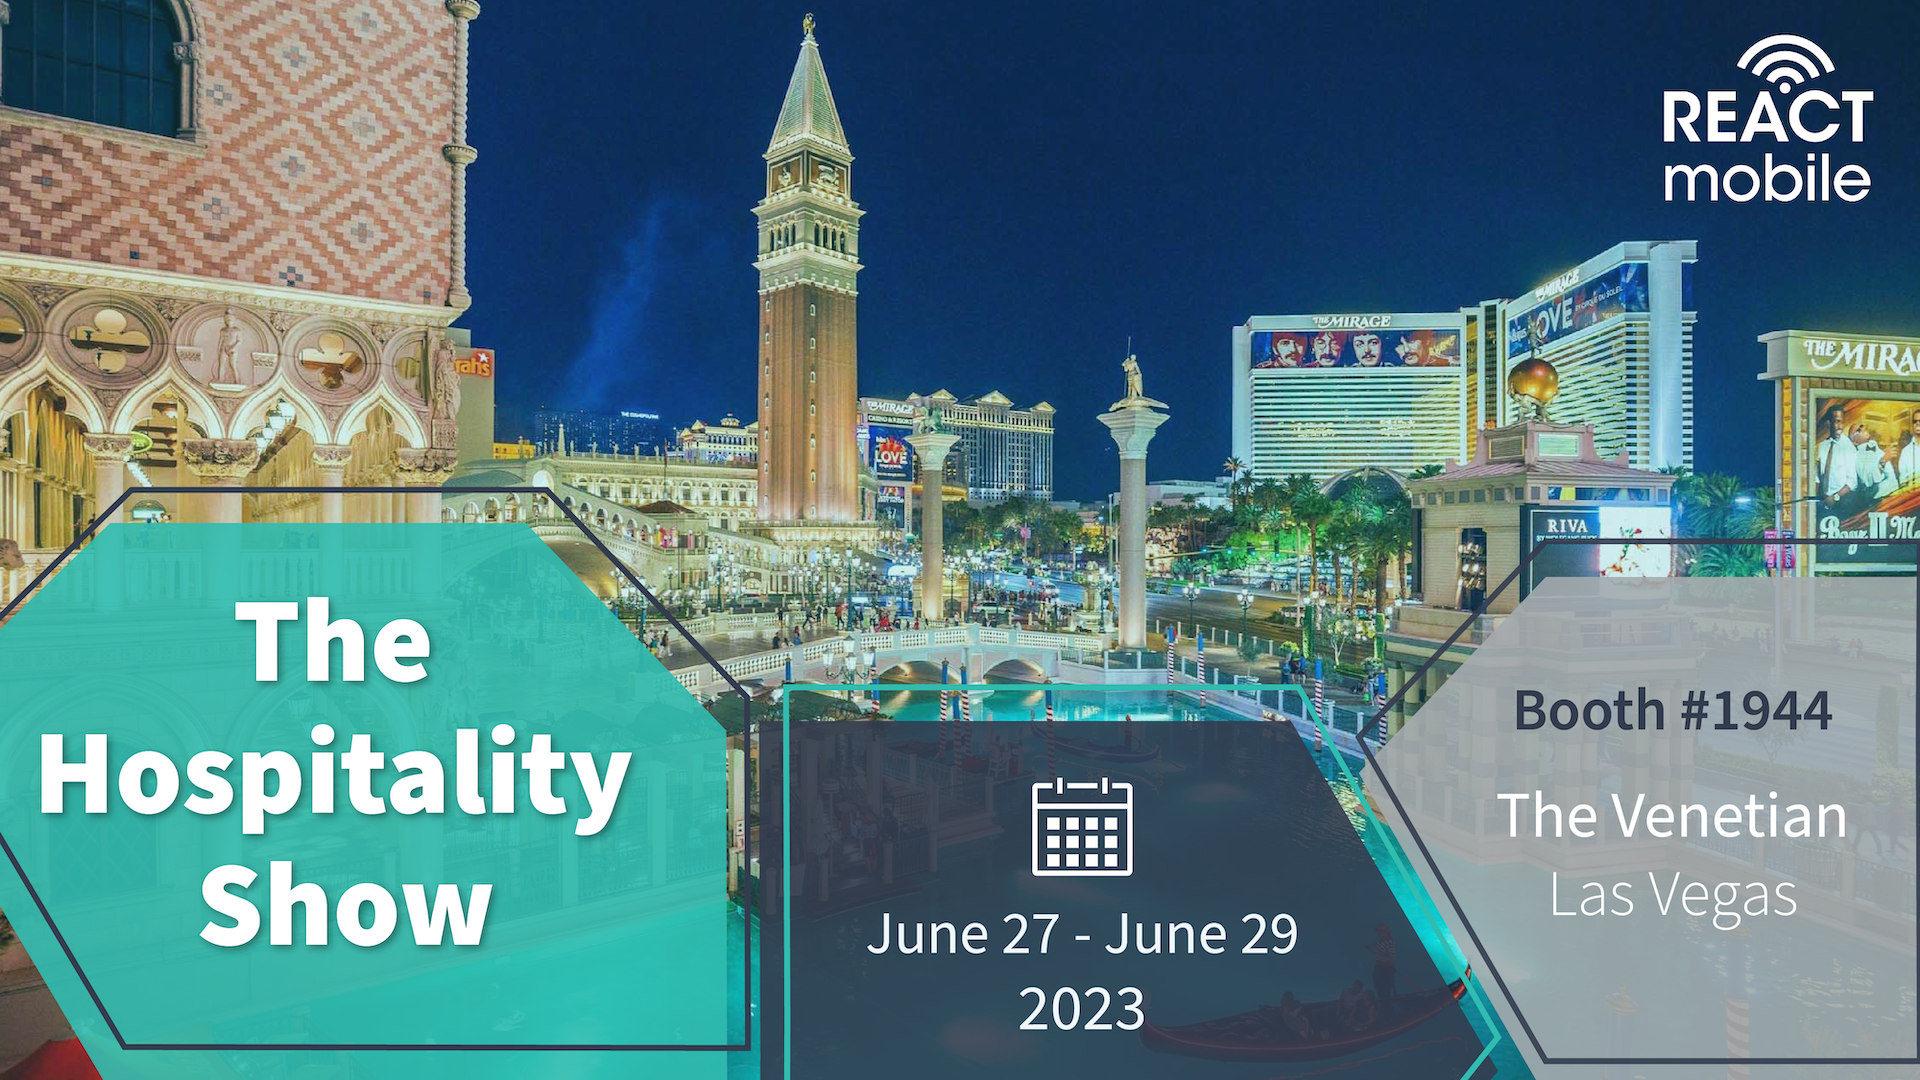 The Hospitality Show to Showcase React Mobile 2.0 Employee Safety Devices